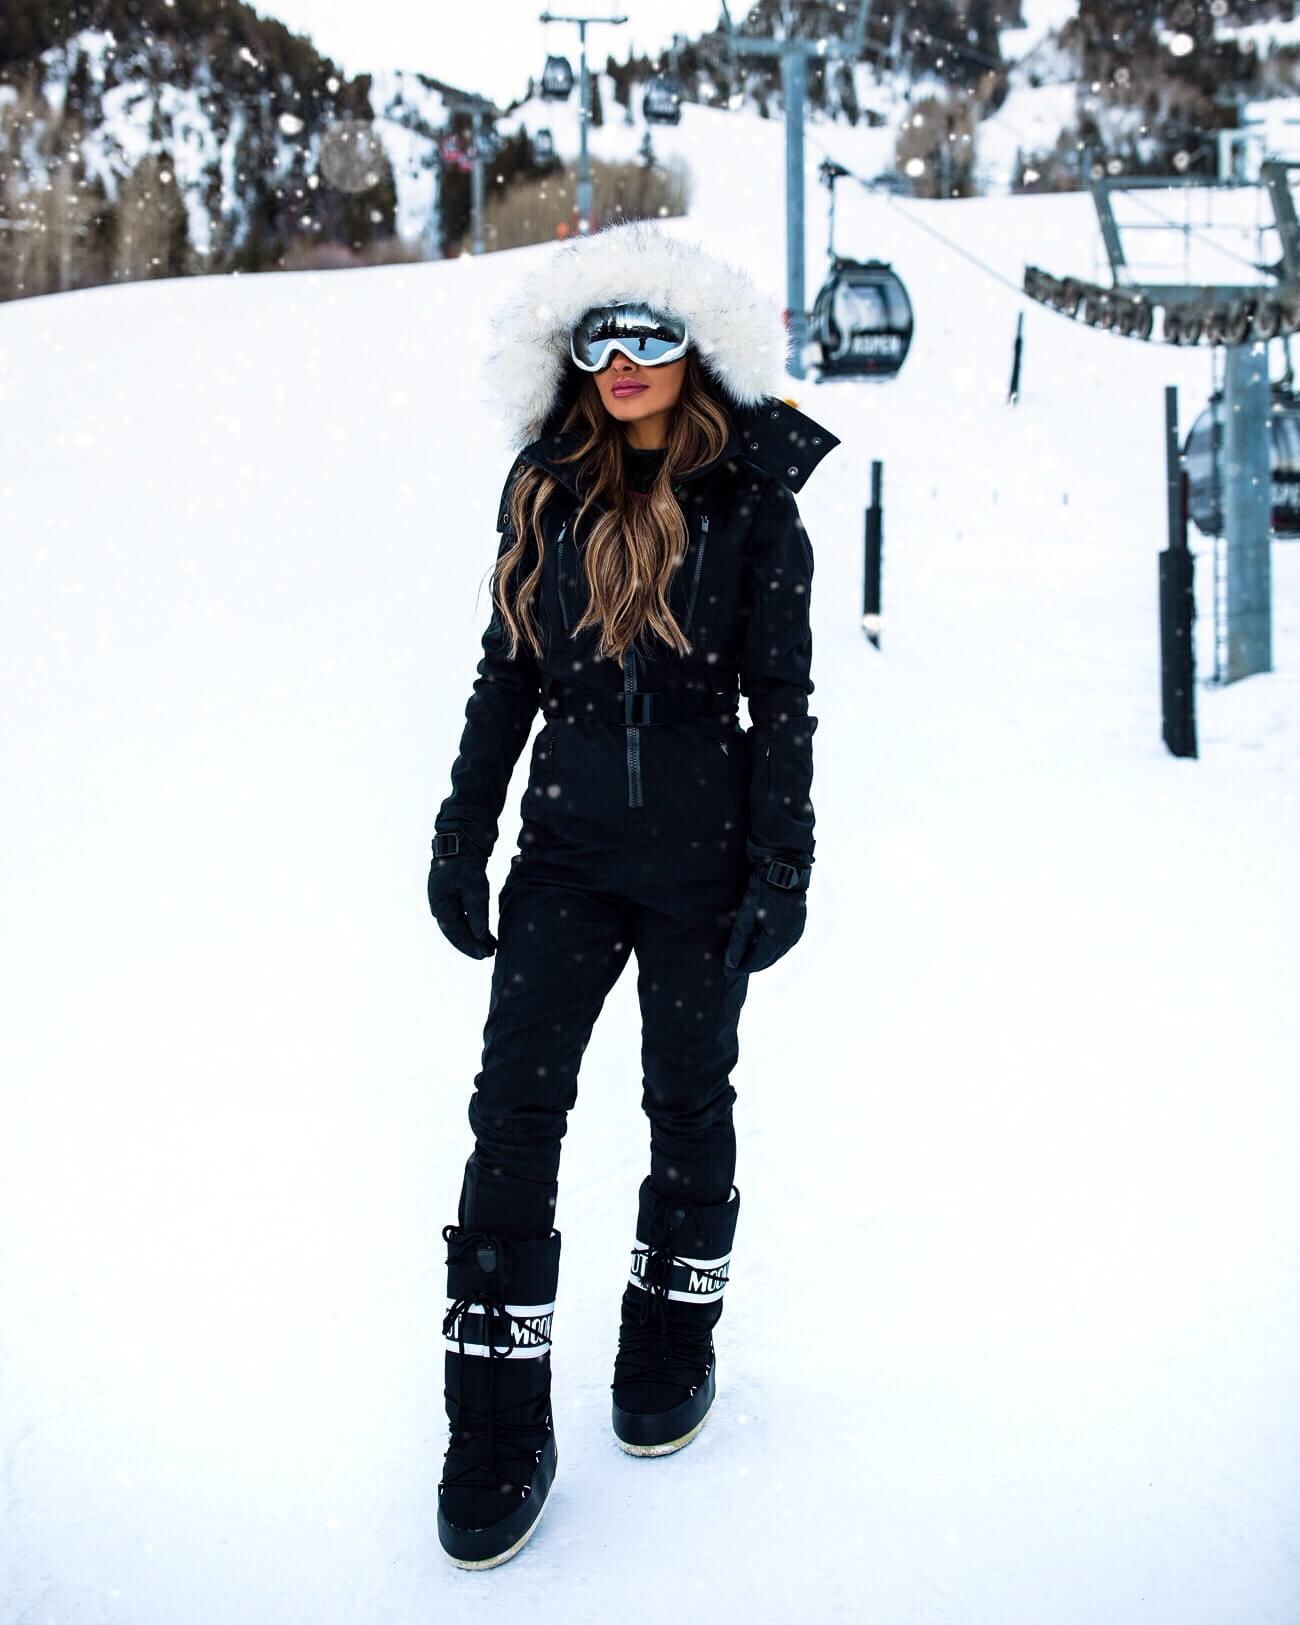 Stylish Ski Outfits for Winter 2019 - 2020